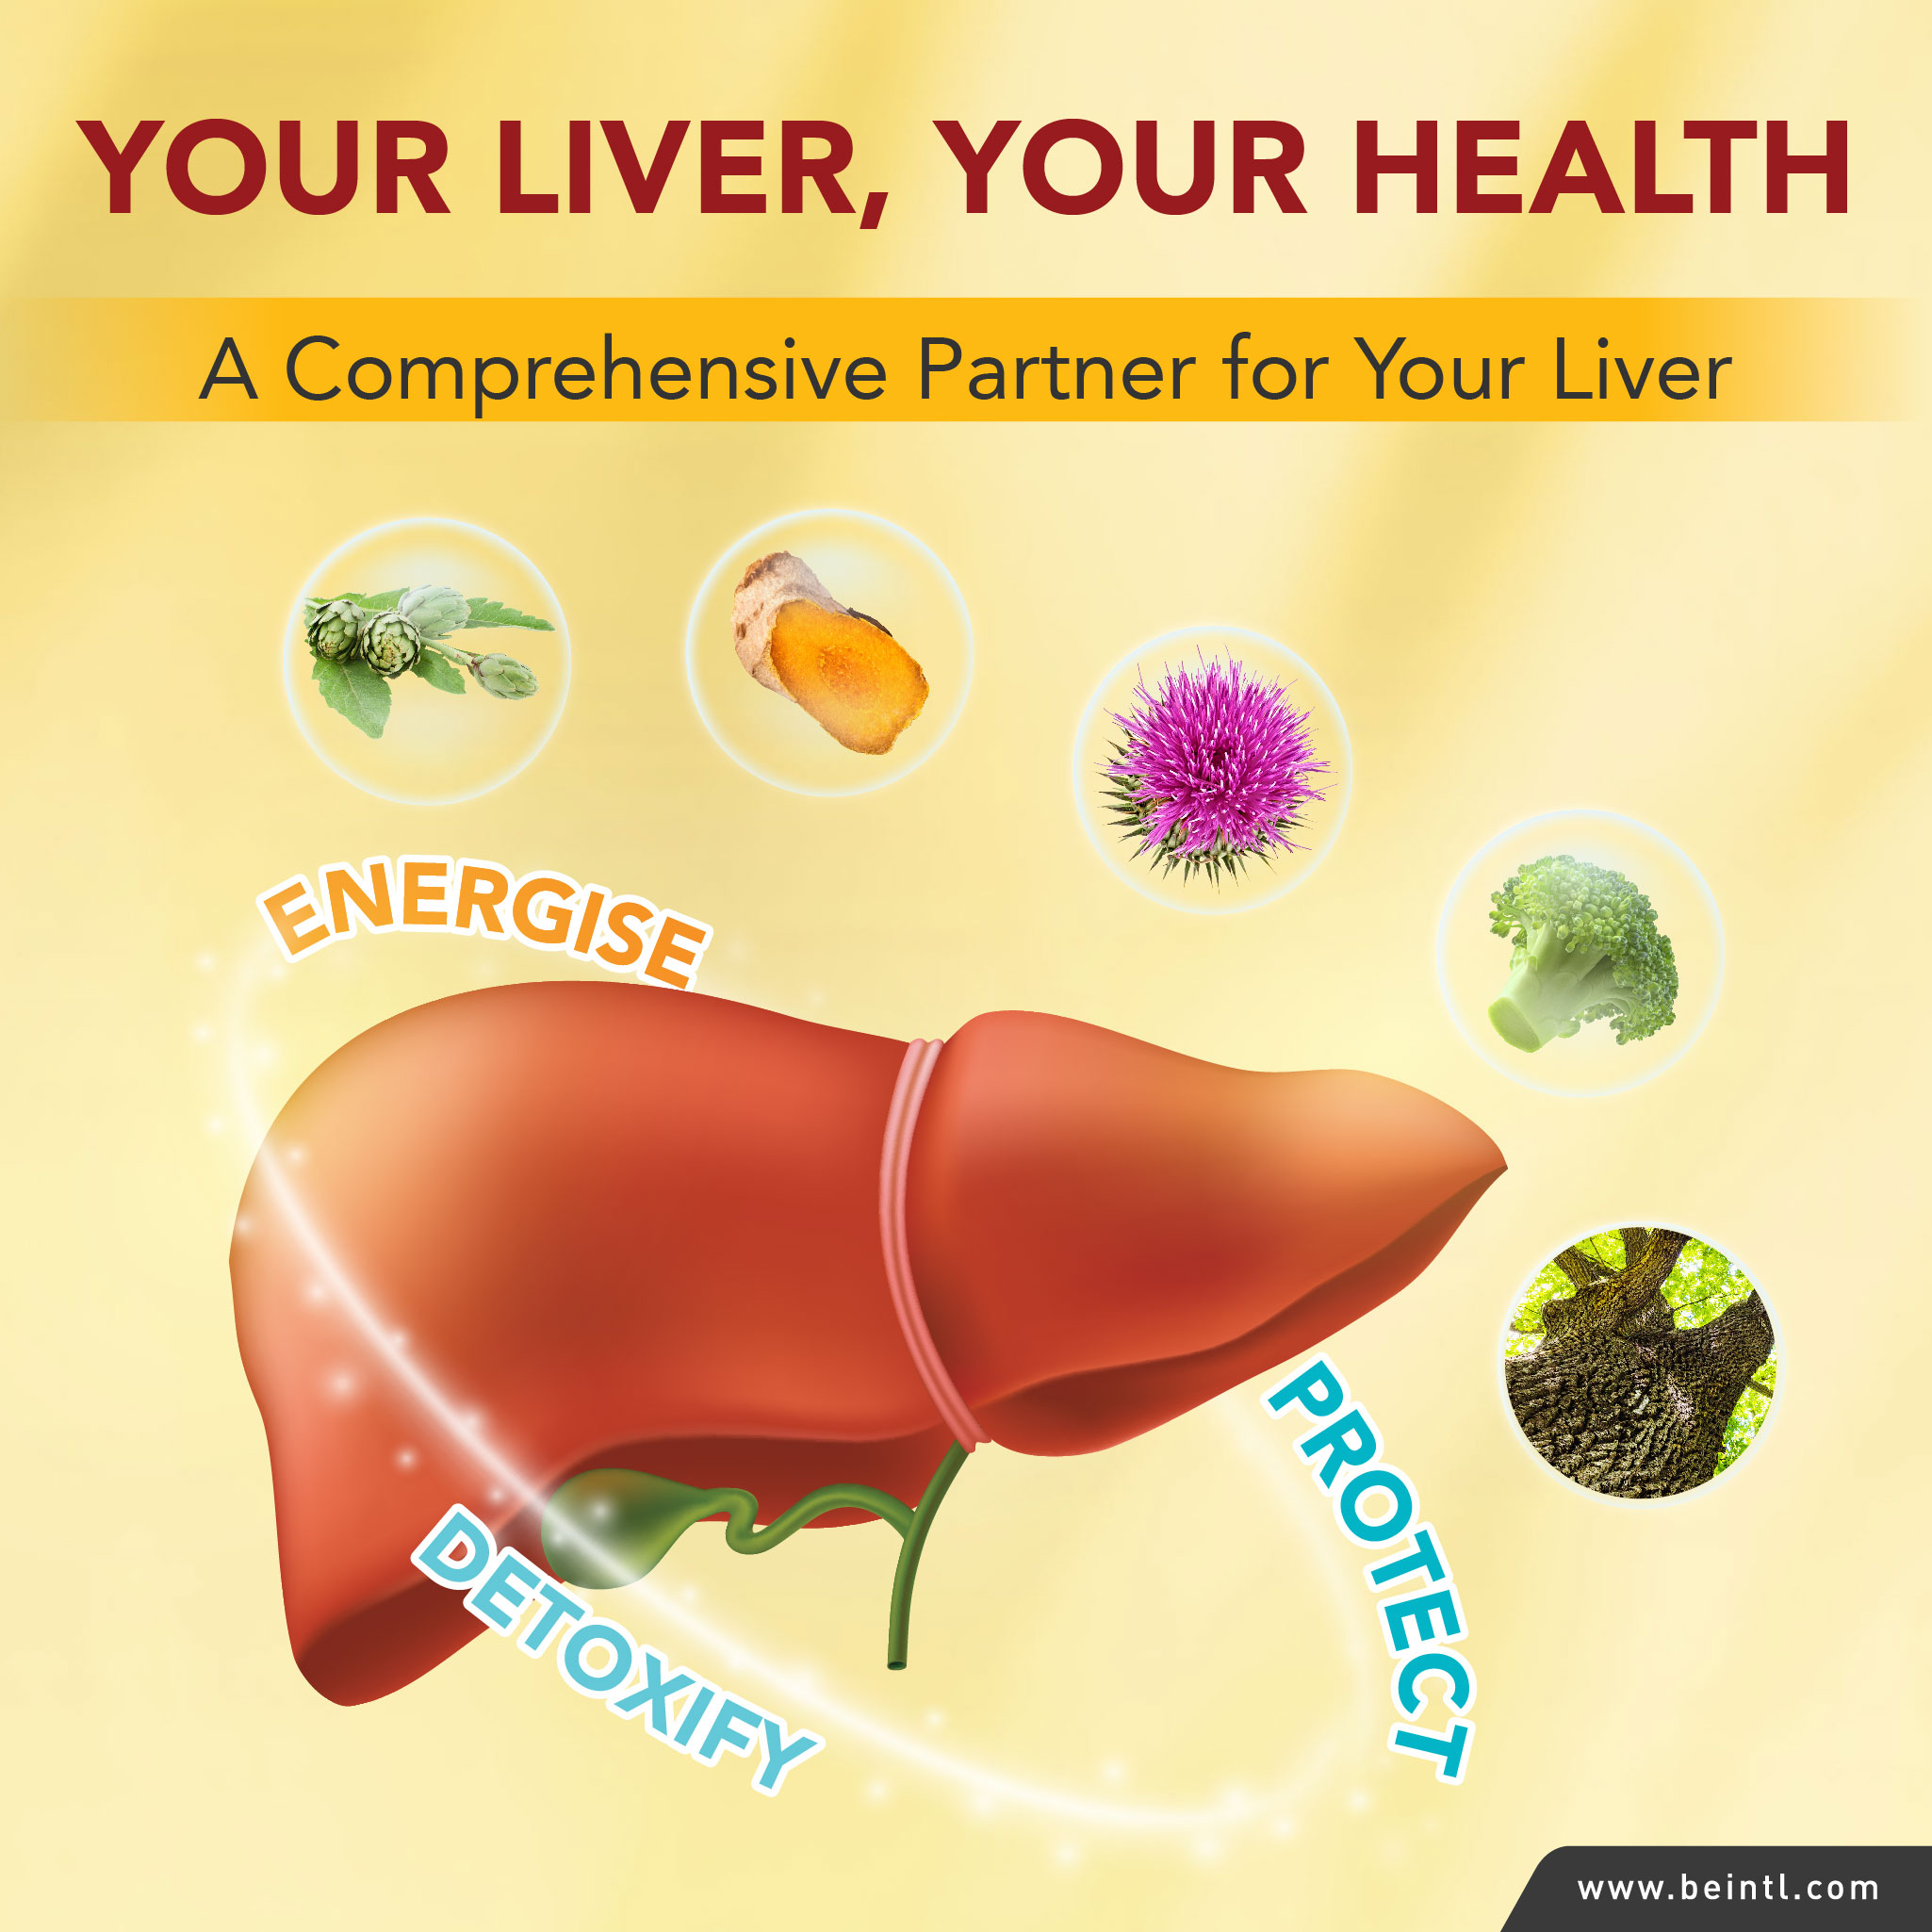 Your Liver, Your Health. A Comprehensive Partner for Your Liver